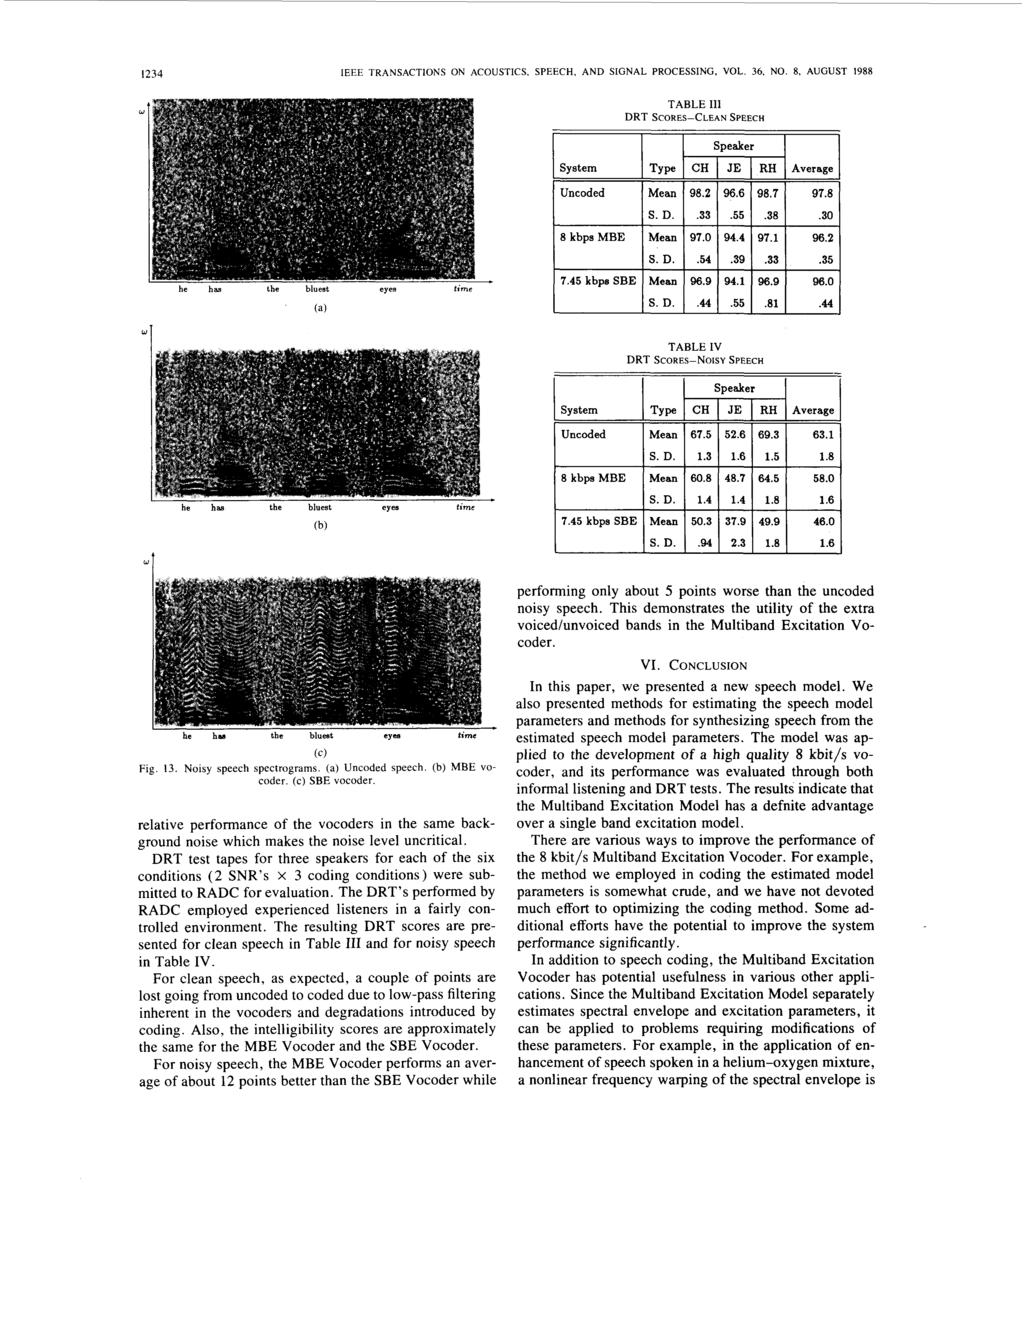 1234 IEEE TRANSACTIONS ON ACOUSTICS, SPEECH, AND SIGNAL PROCESSING, VOL. 36, NO. 8, AUGUST 1988 he has the bluest eyes time System Uncoded 8 kbps MBE 7.